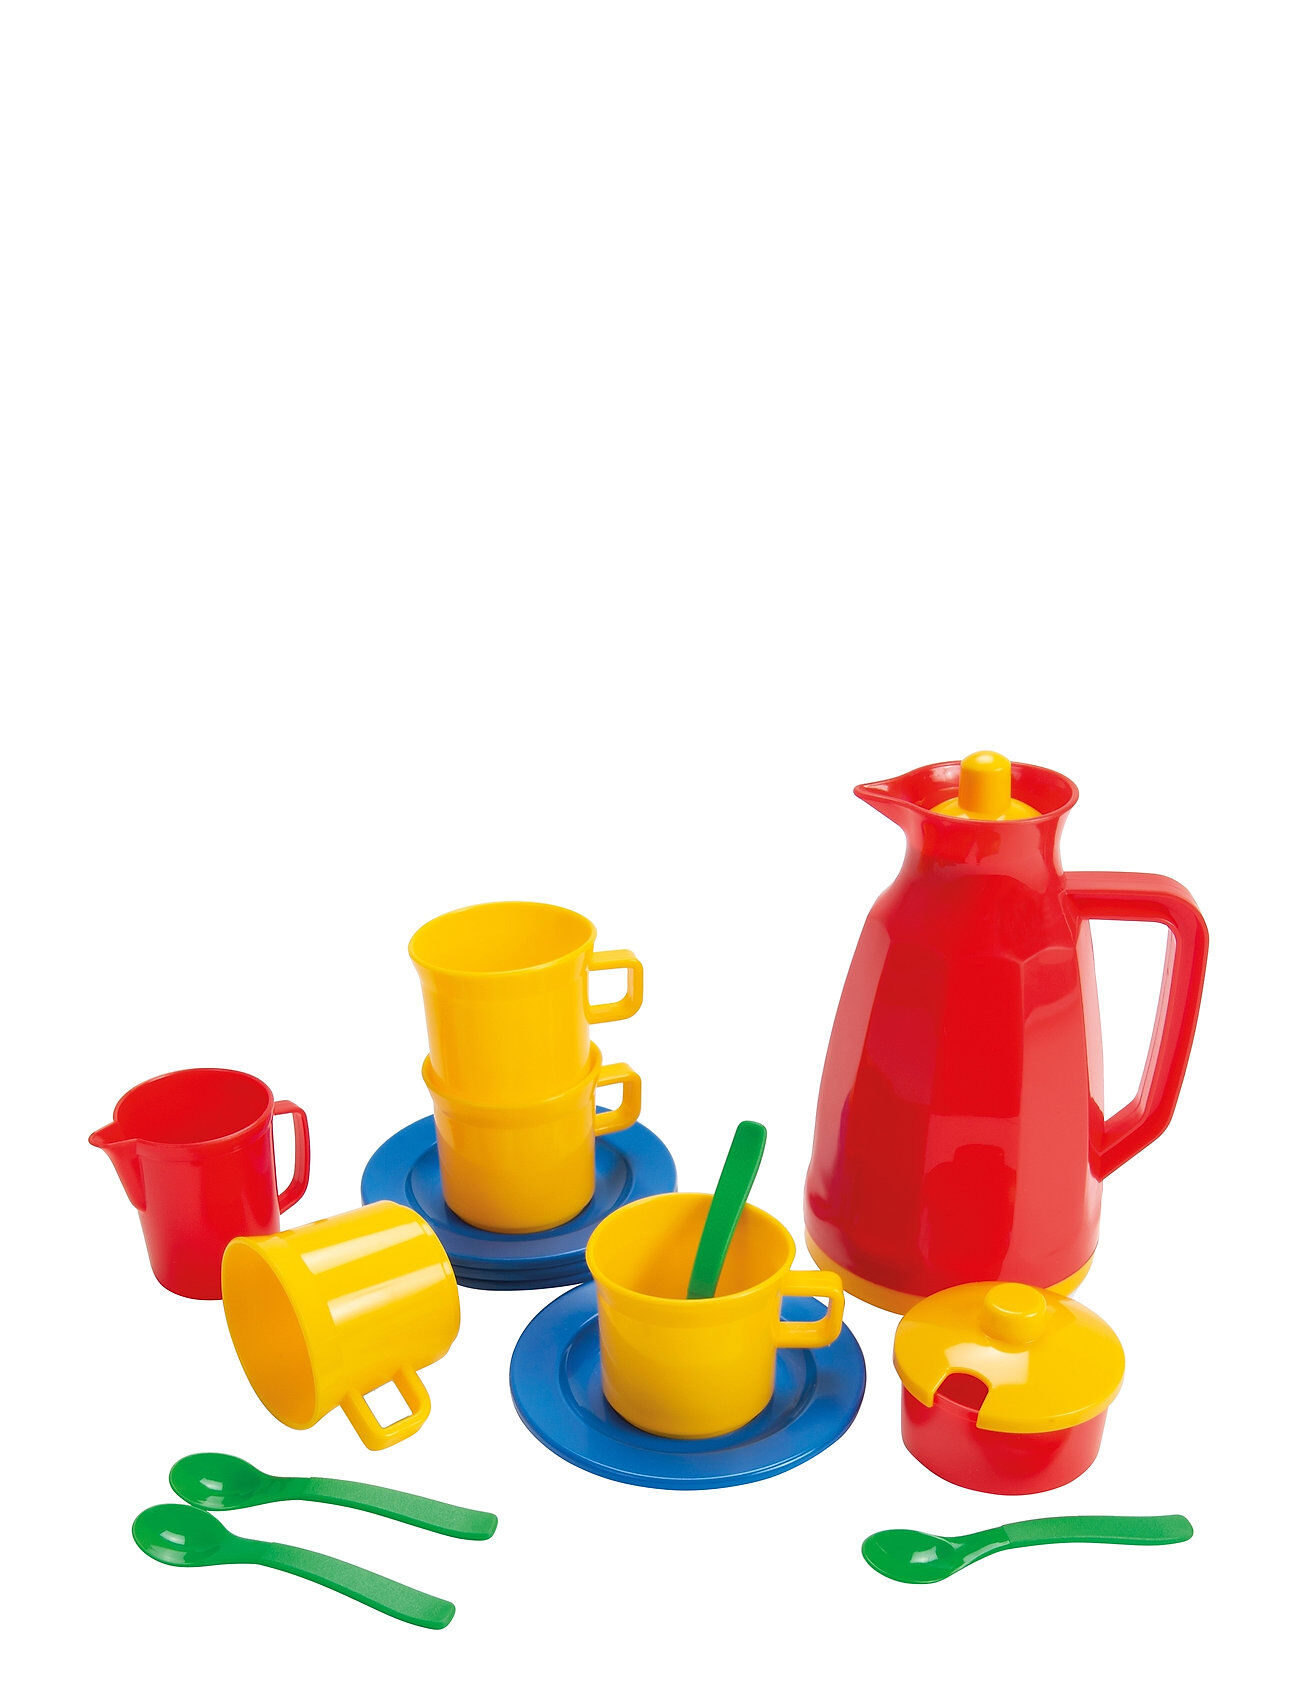 Dantoy Coffee Set In Box Toys Toy Kitchen & Accessories Coffee & Tee Sets Multi/mønstret Dantoy